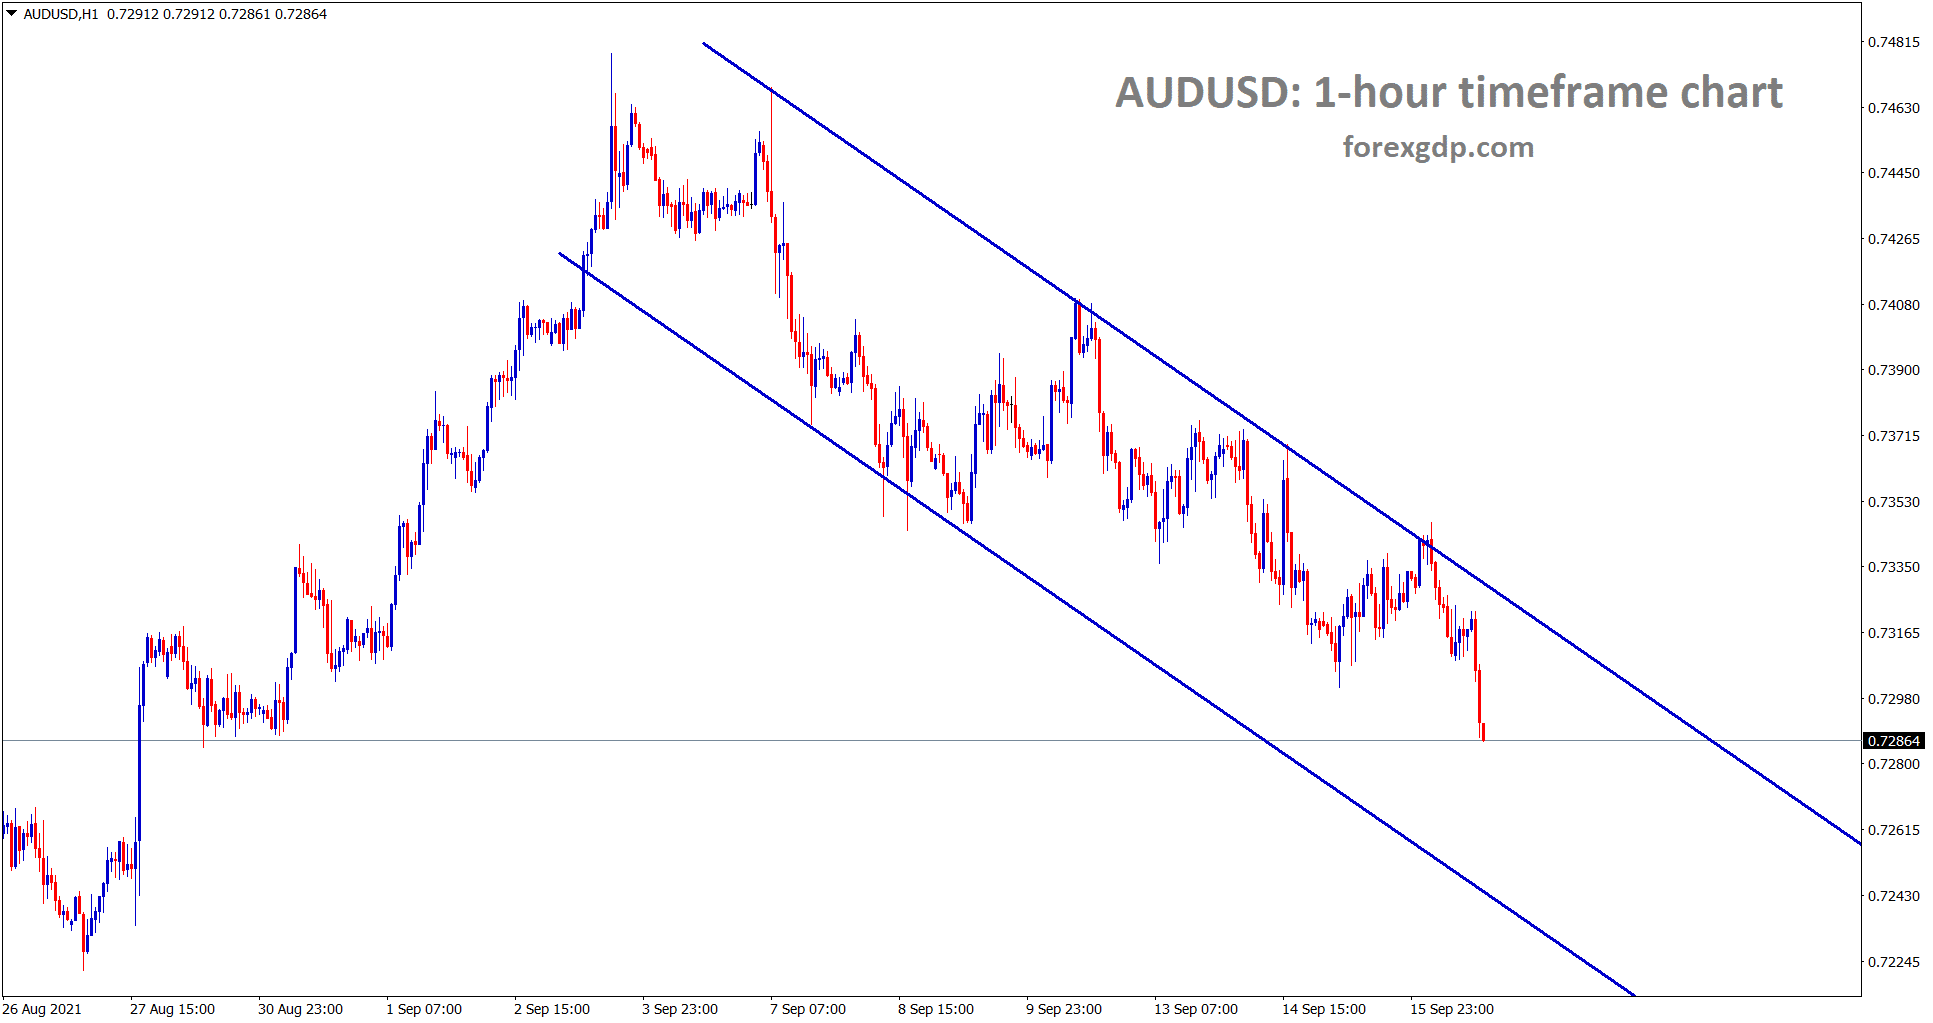 AUDUSD is moving in a descending channel